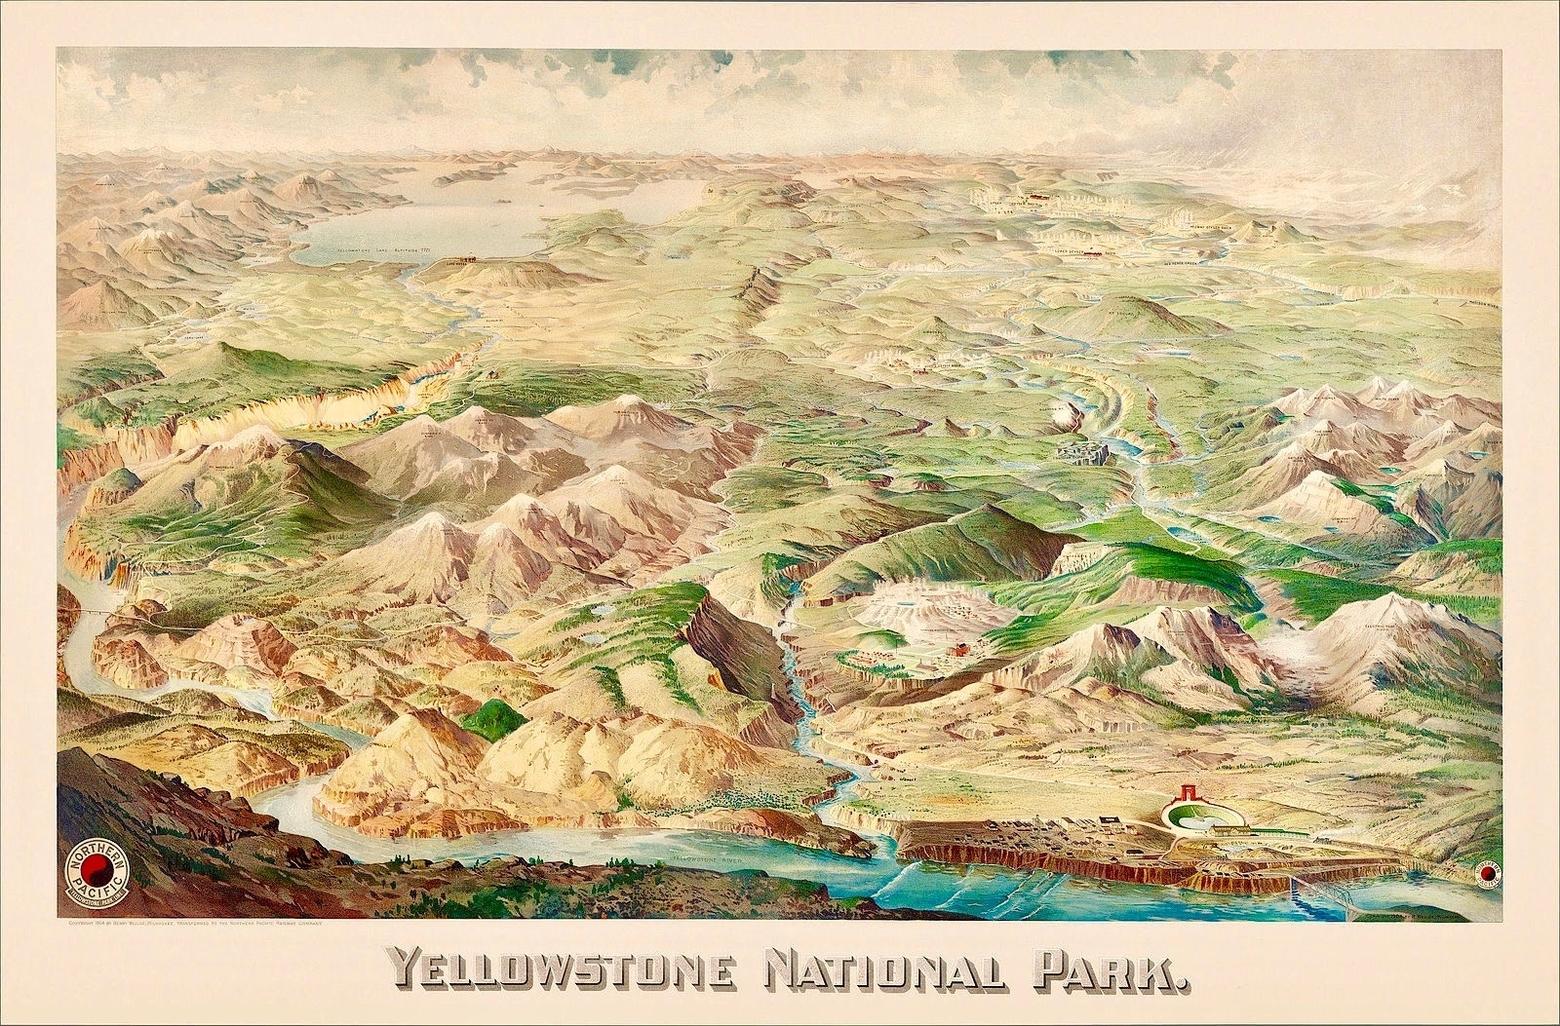 Since this map of Yellowstone was drawn in 1904, the value of the Greater Yellowstone Ecosystem has expanded as our knowledge (and appreciation) of the natural world has grown.